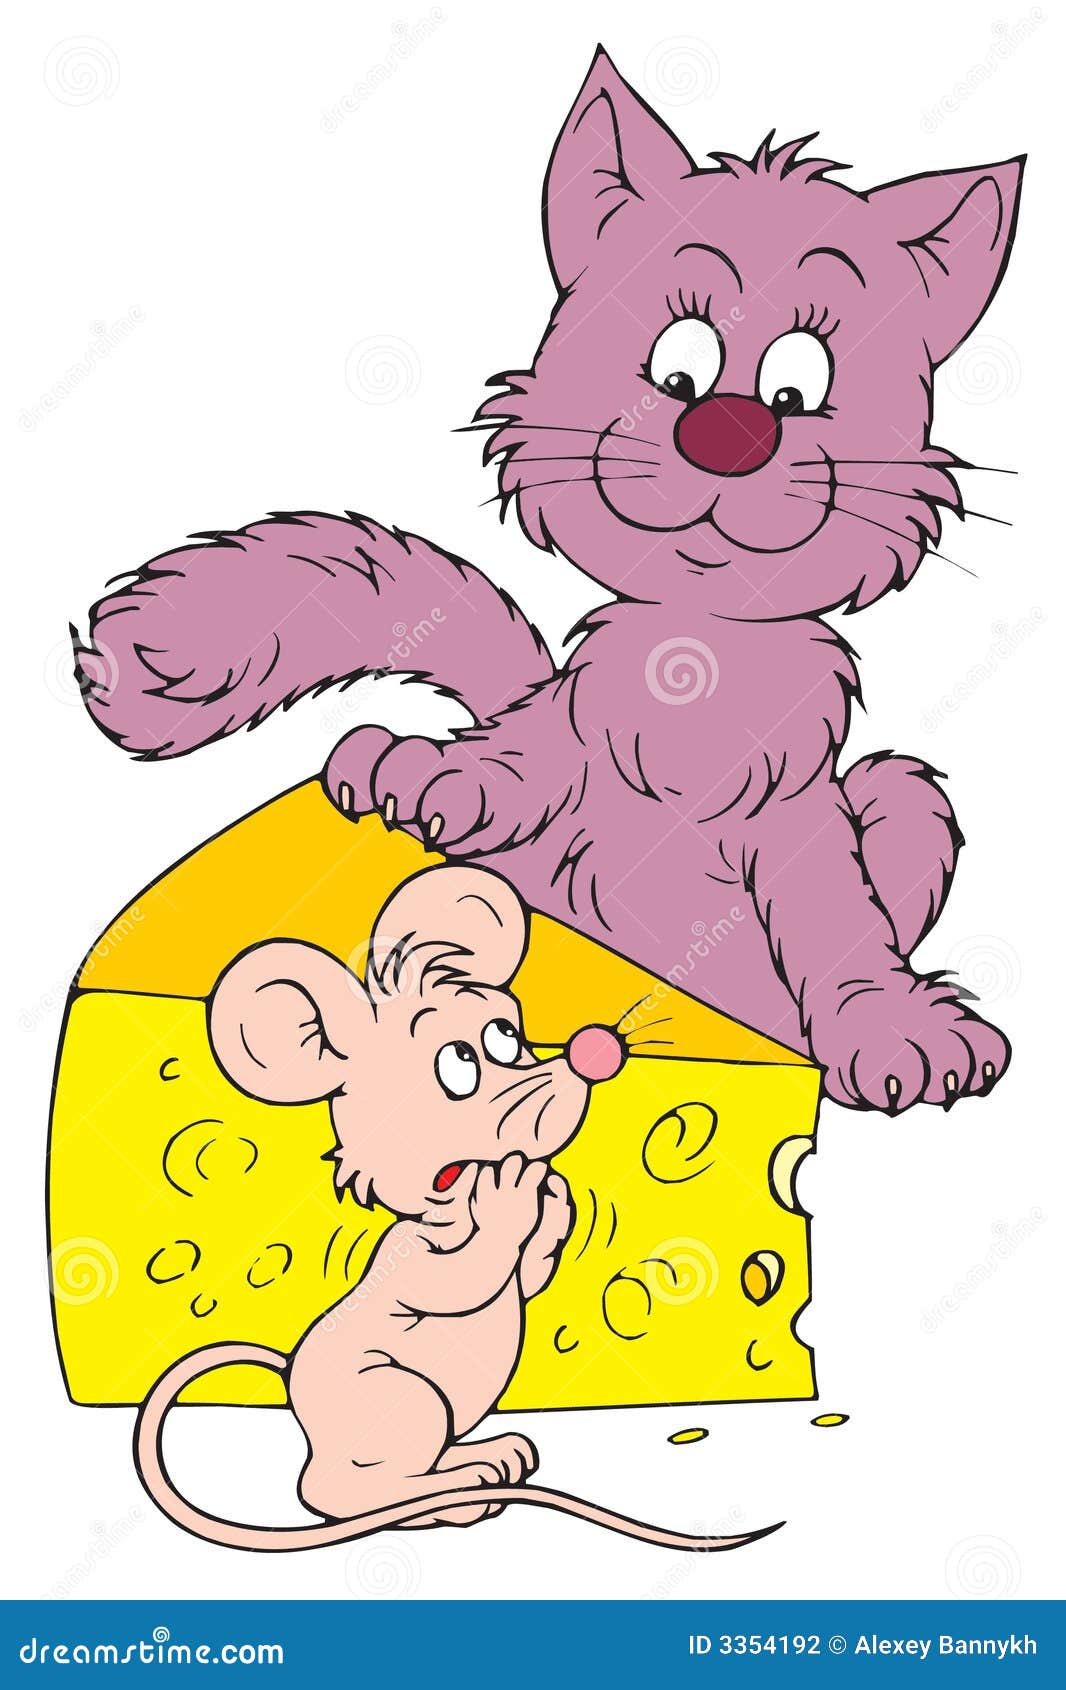 cat and mouse clip art free - photo #25